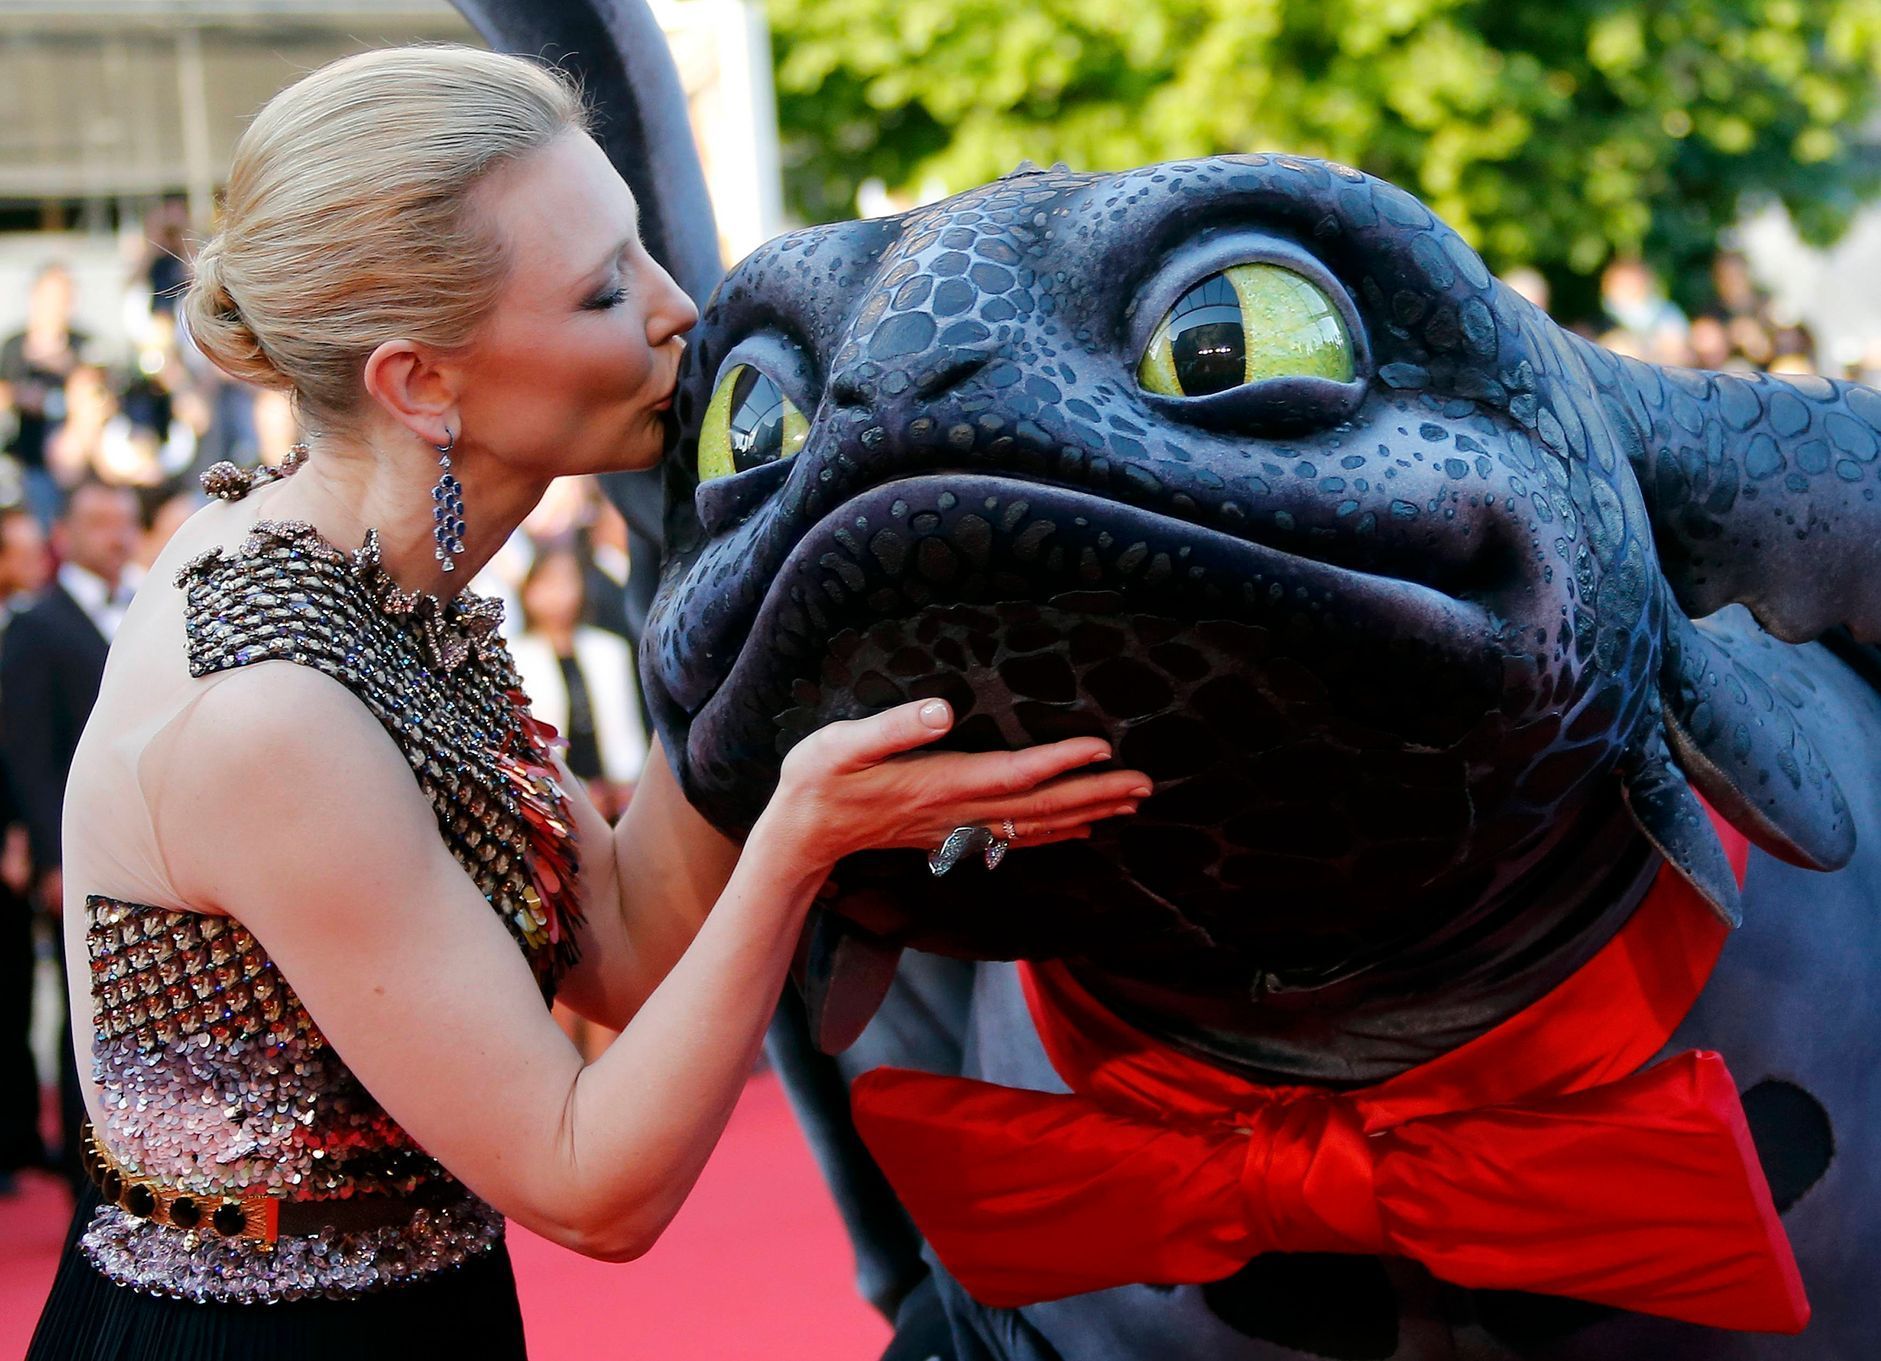 Actress Cate Blanchett poses on the red carpet with a figure of Toothless the Dragon character as she arrives for the screening of the film &quot;How to Train Your Dragon 2&quot; out of competition at